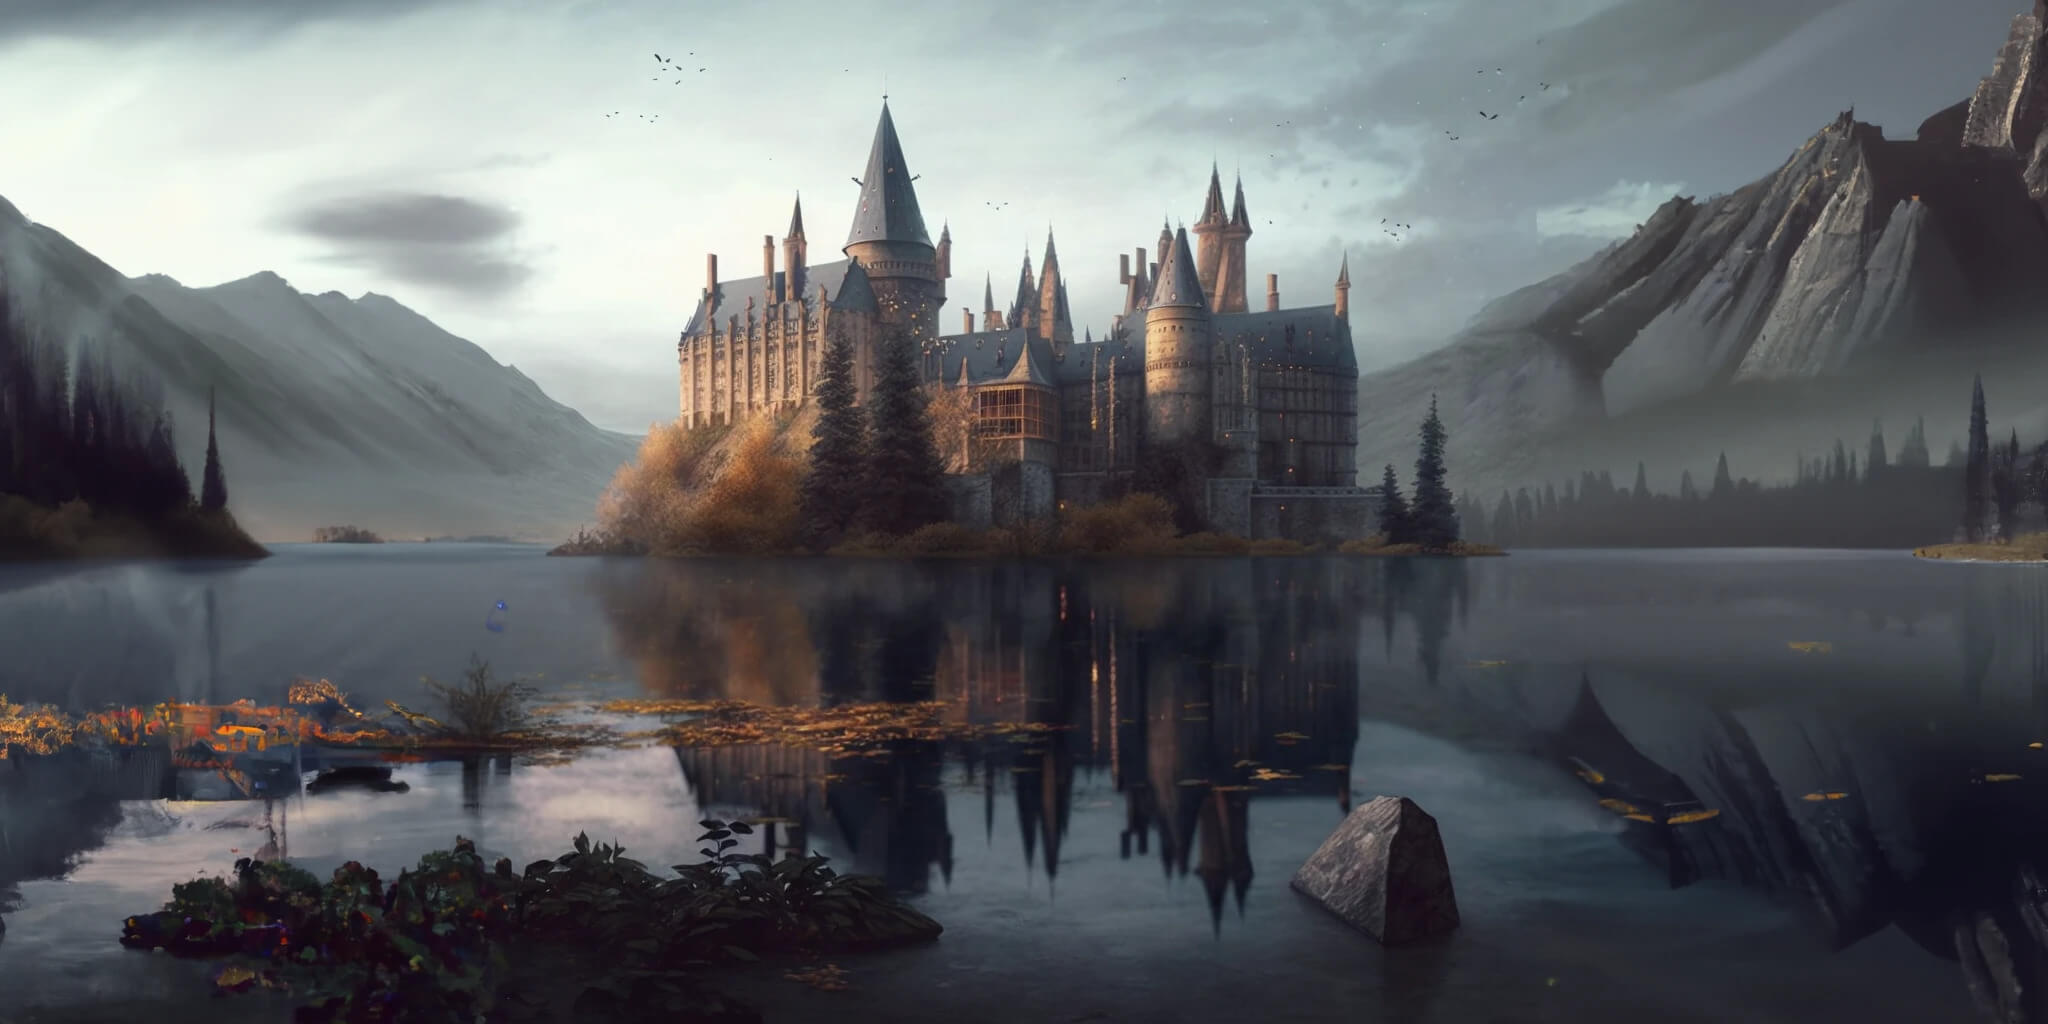 Harry Potter Movies: A Guide to Hogwarts School of Witchcraft and Wizardry 2